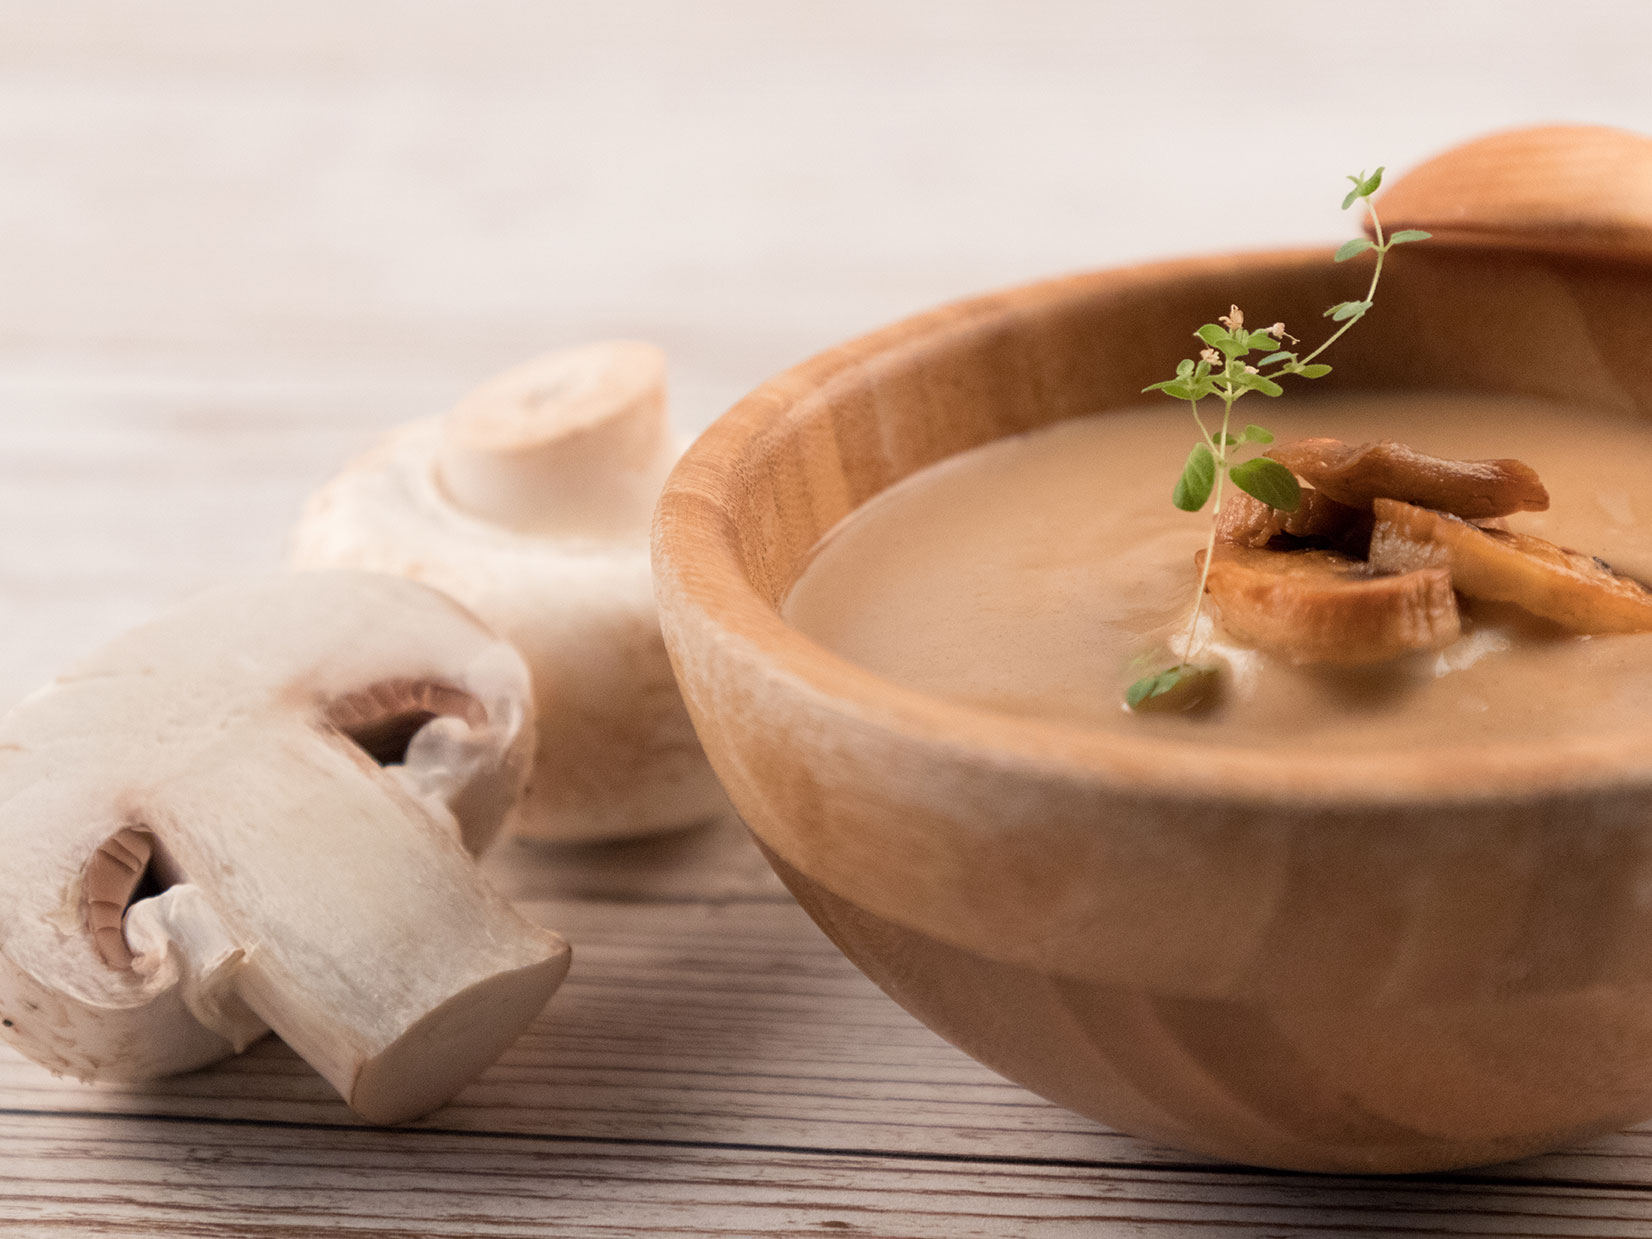 Mushroom Soup In Wooden Bowl With Roasted Mushrooms And Herbs On